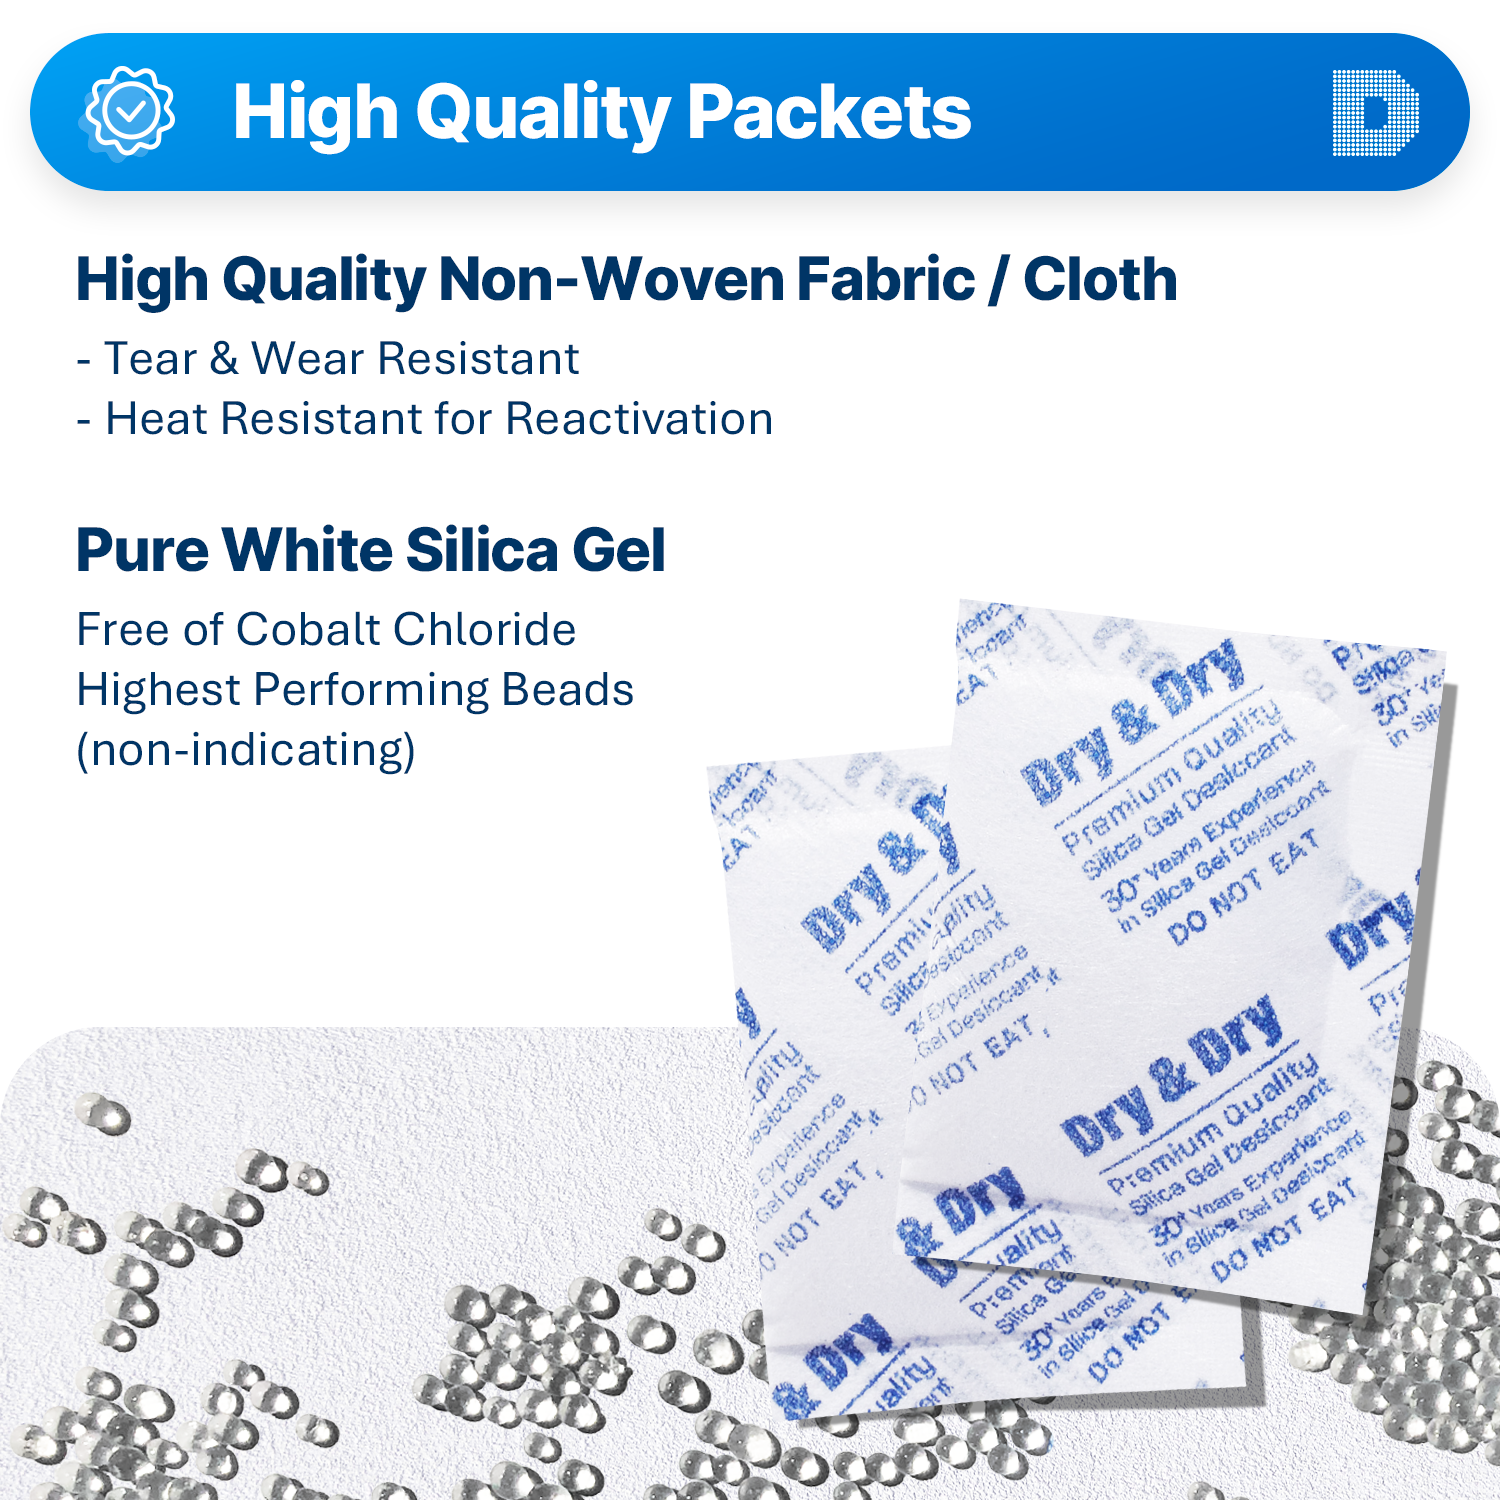 10 Gram Non-Woven Fabric(Cloth) Packets